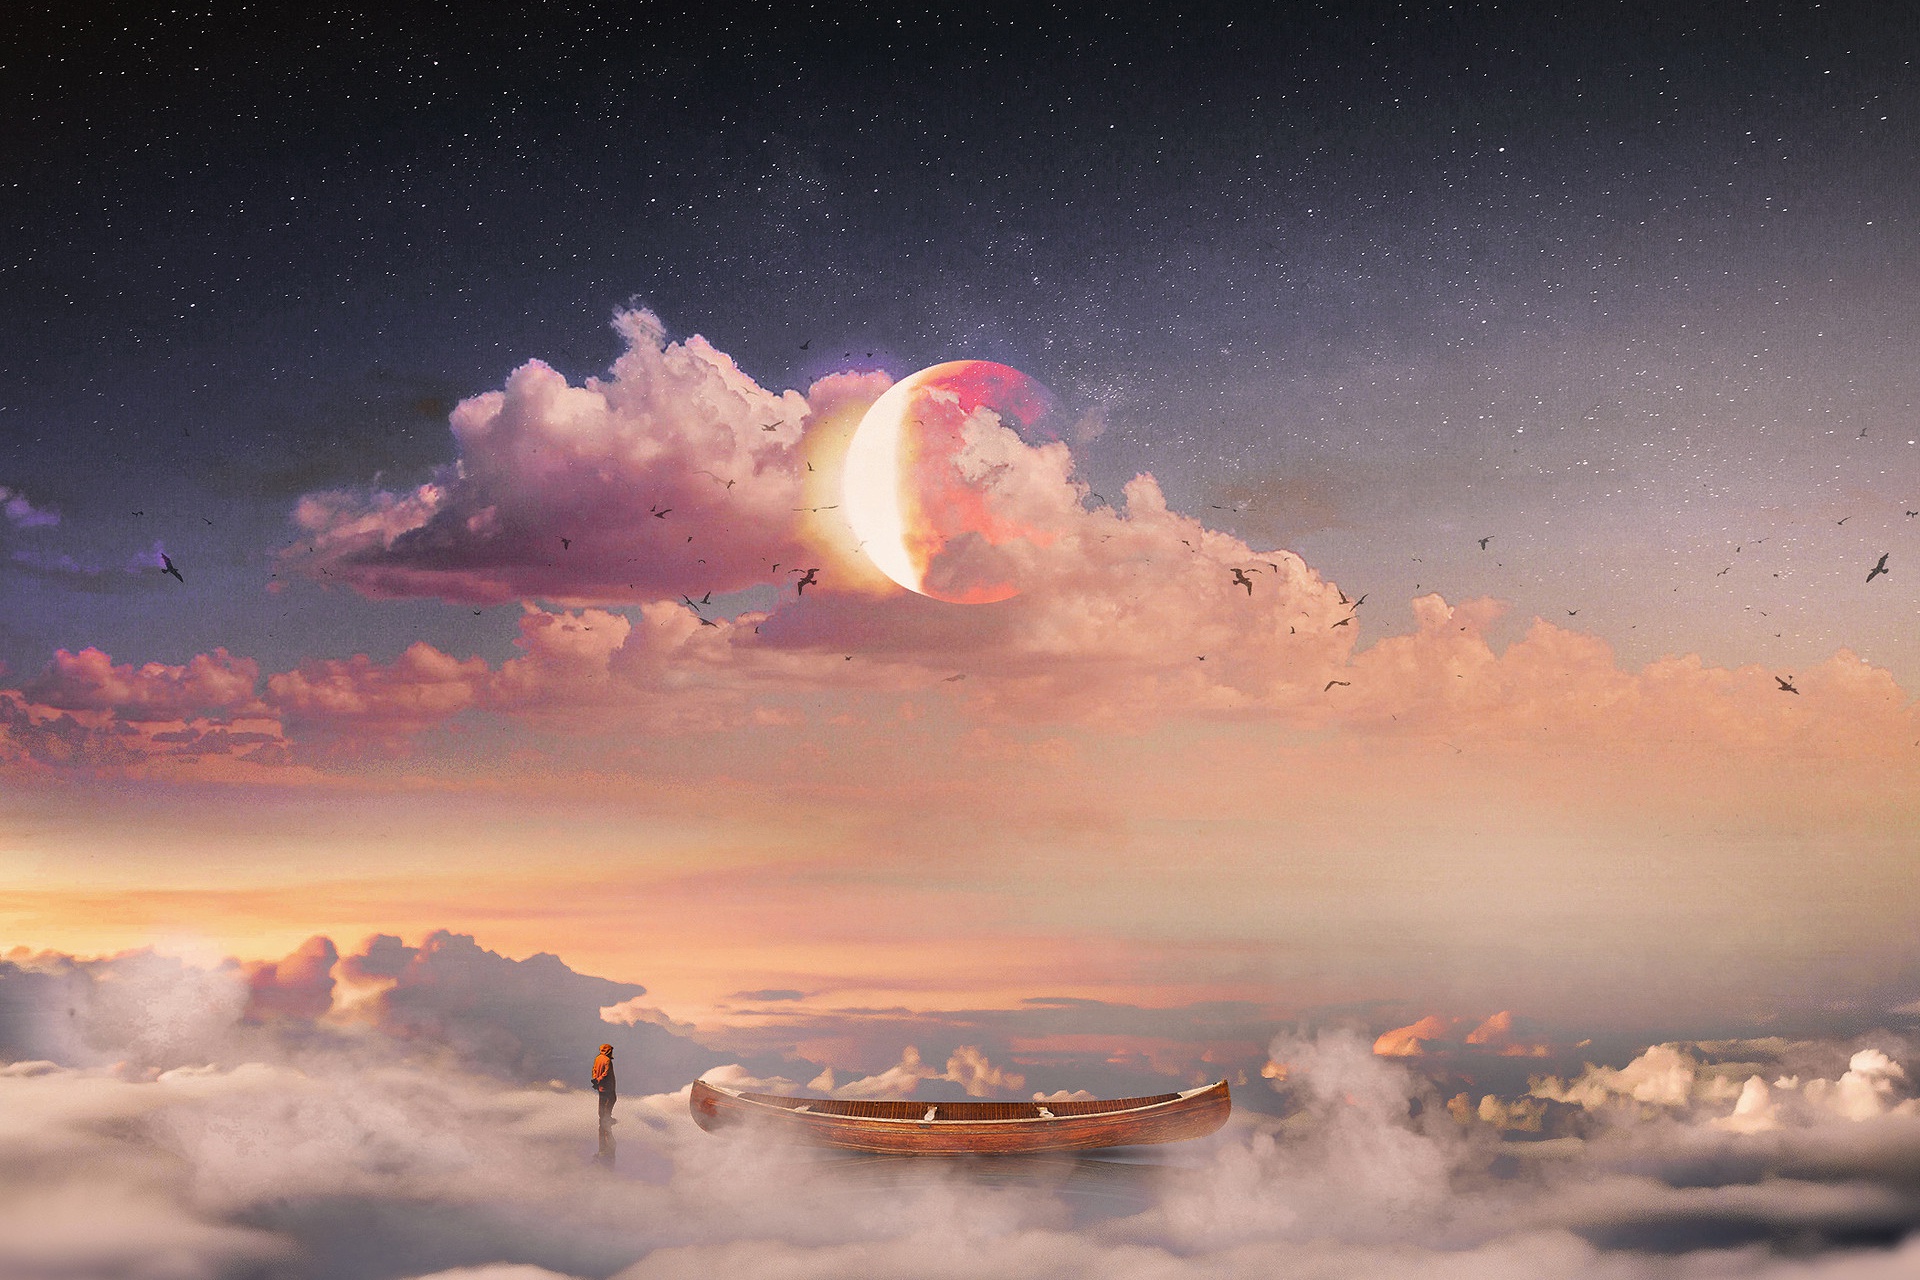 A dreamy fantasy HD desktop wallpaper featuring a magical landscape with vivid colors and ethereal details.